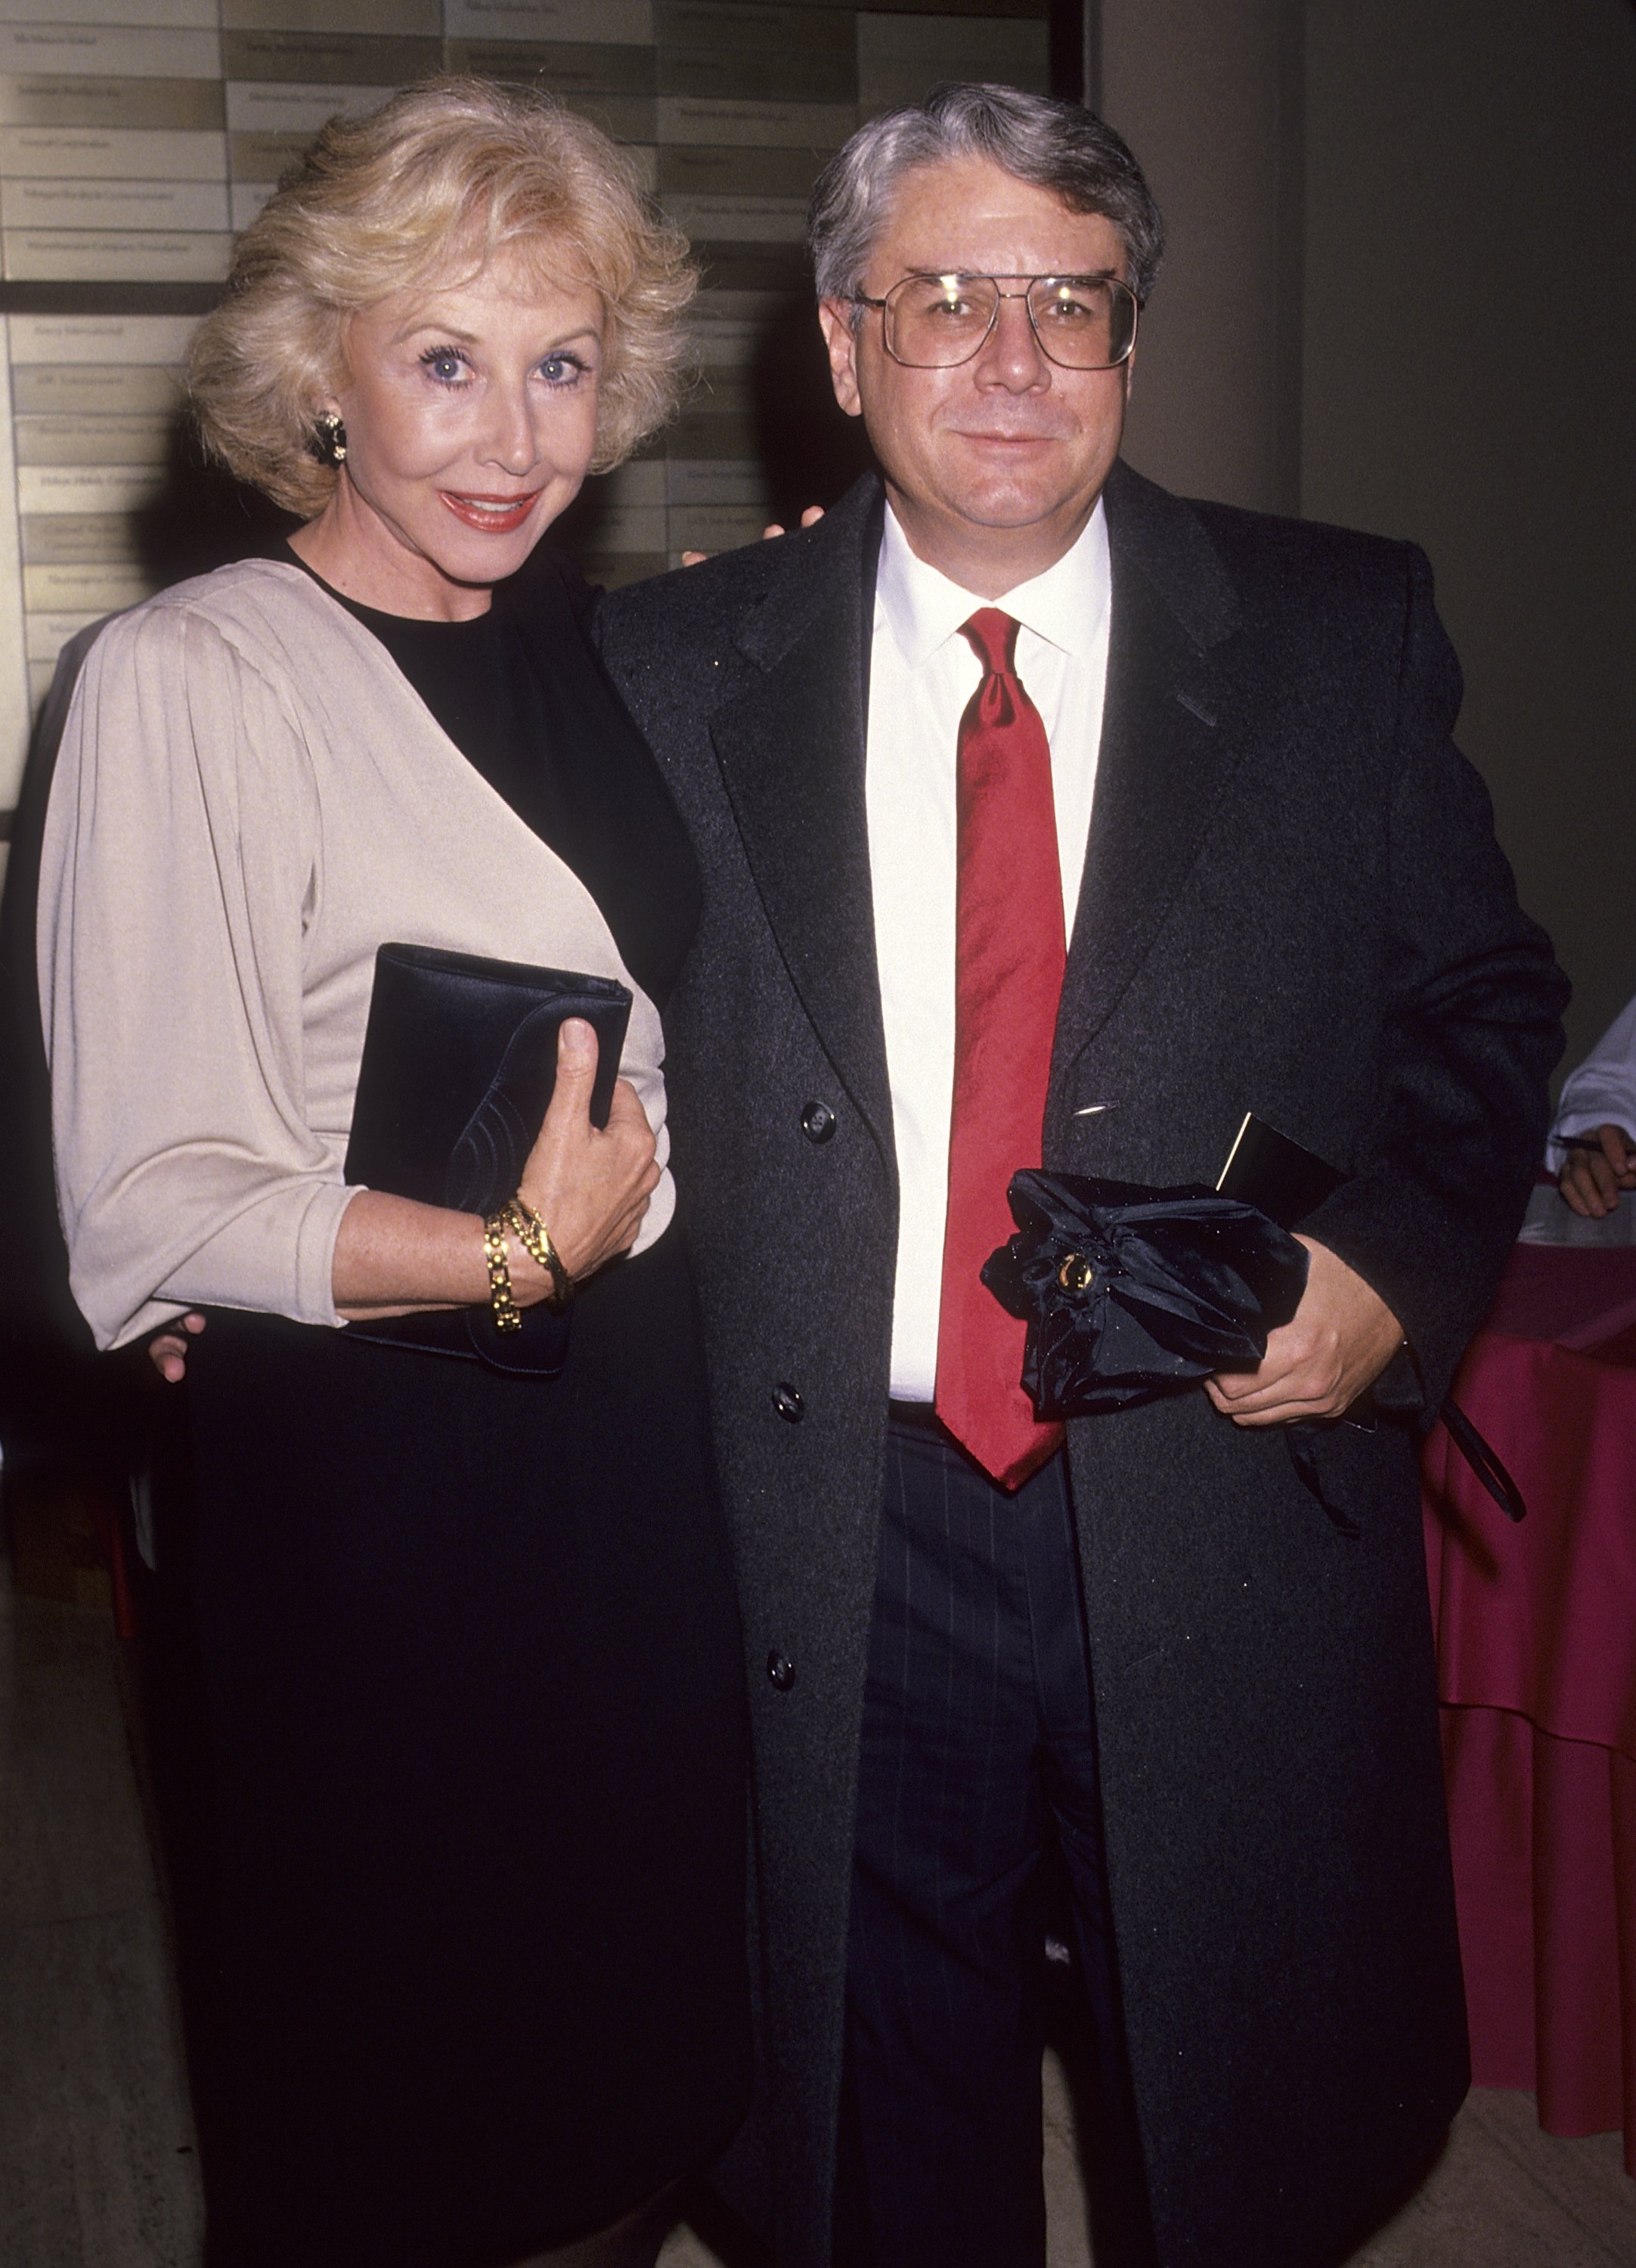 Michael Learned and her fiance John Doherty attend the Museum of Broadcasting's Eigth Annual Television Festival Kick-Off Cocktail Reception at the Los Angeles County Museum of Art on March 4, 1991 in Los Angeles, California ┃Source: Getty Images